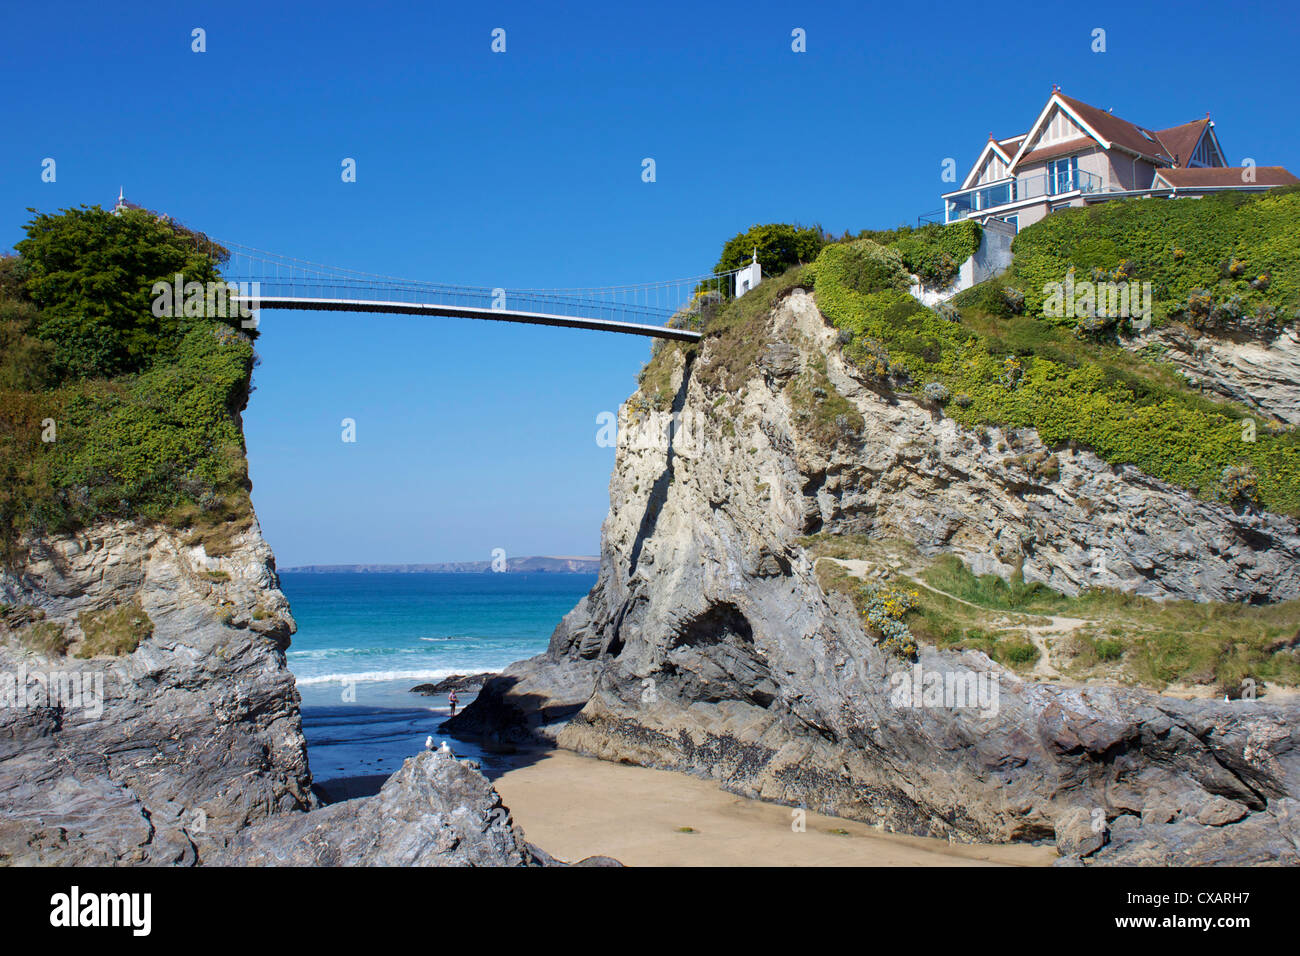 Plage de Towan, Newquay, Cornwall, Angleterre, Royaume-Uni, Europe Banque D'Images